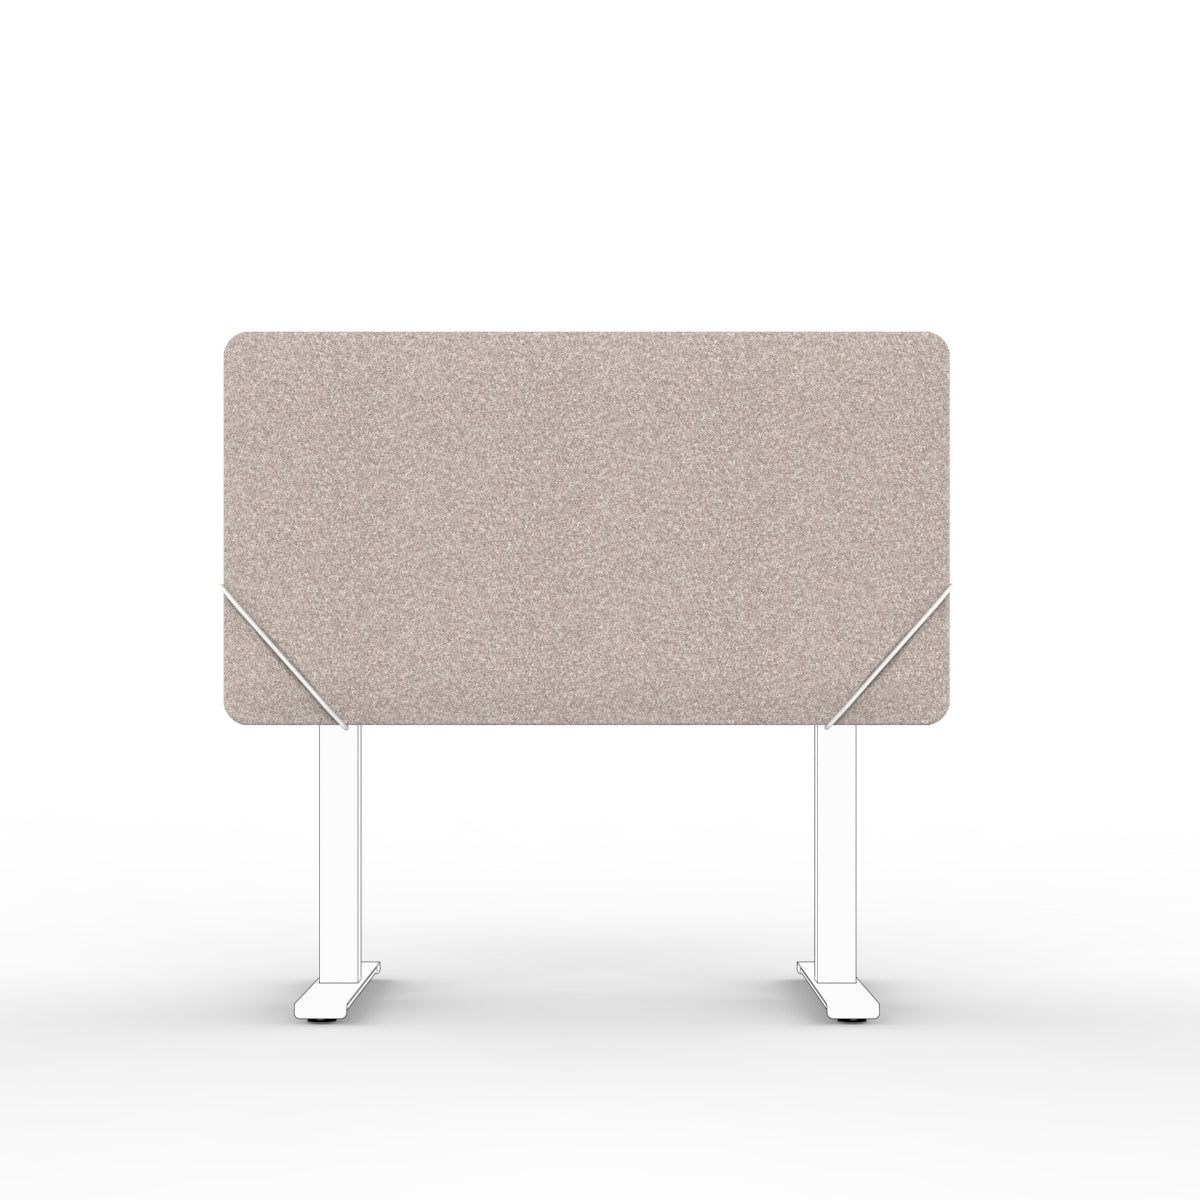 Table screen sound absorber in dark beige woo felt with white slide on table mounts. 